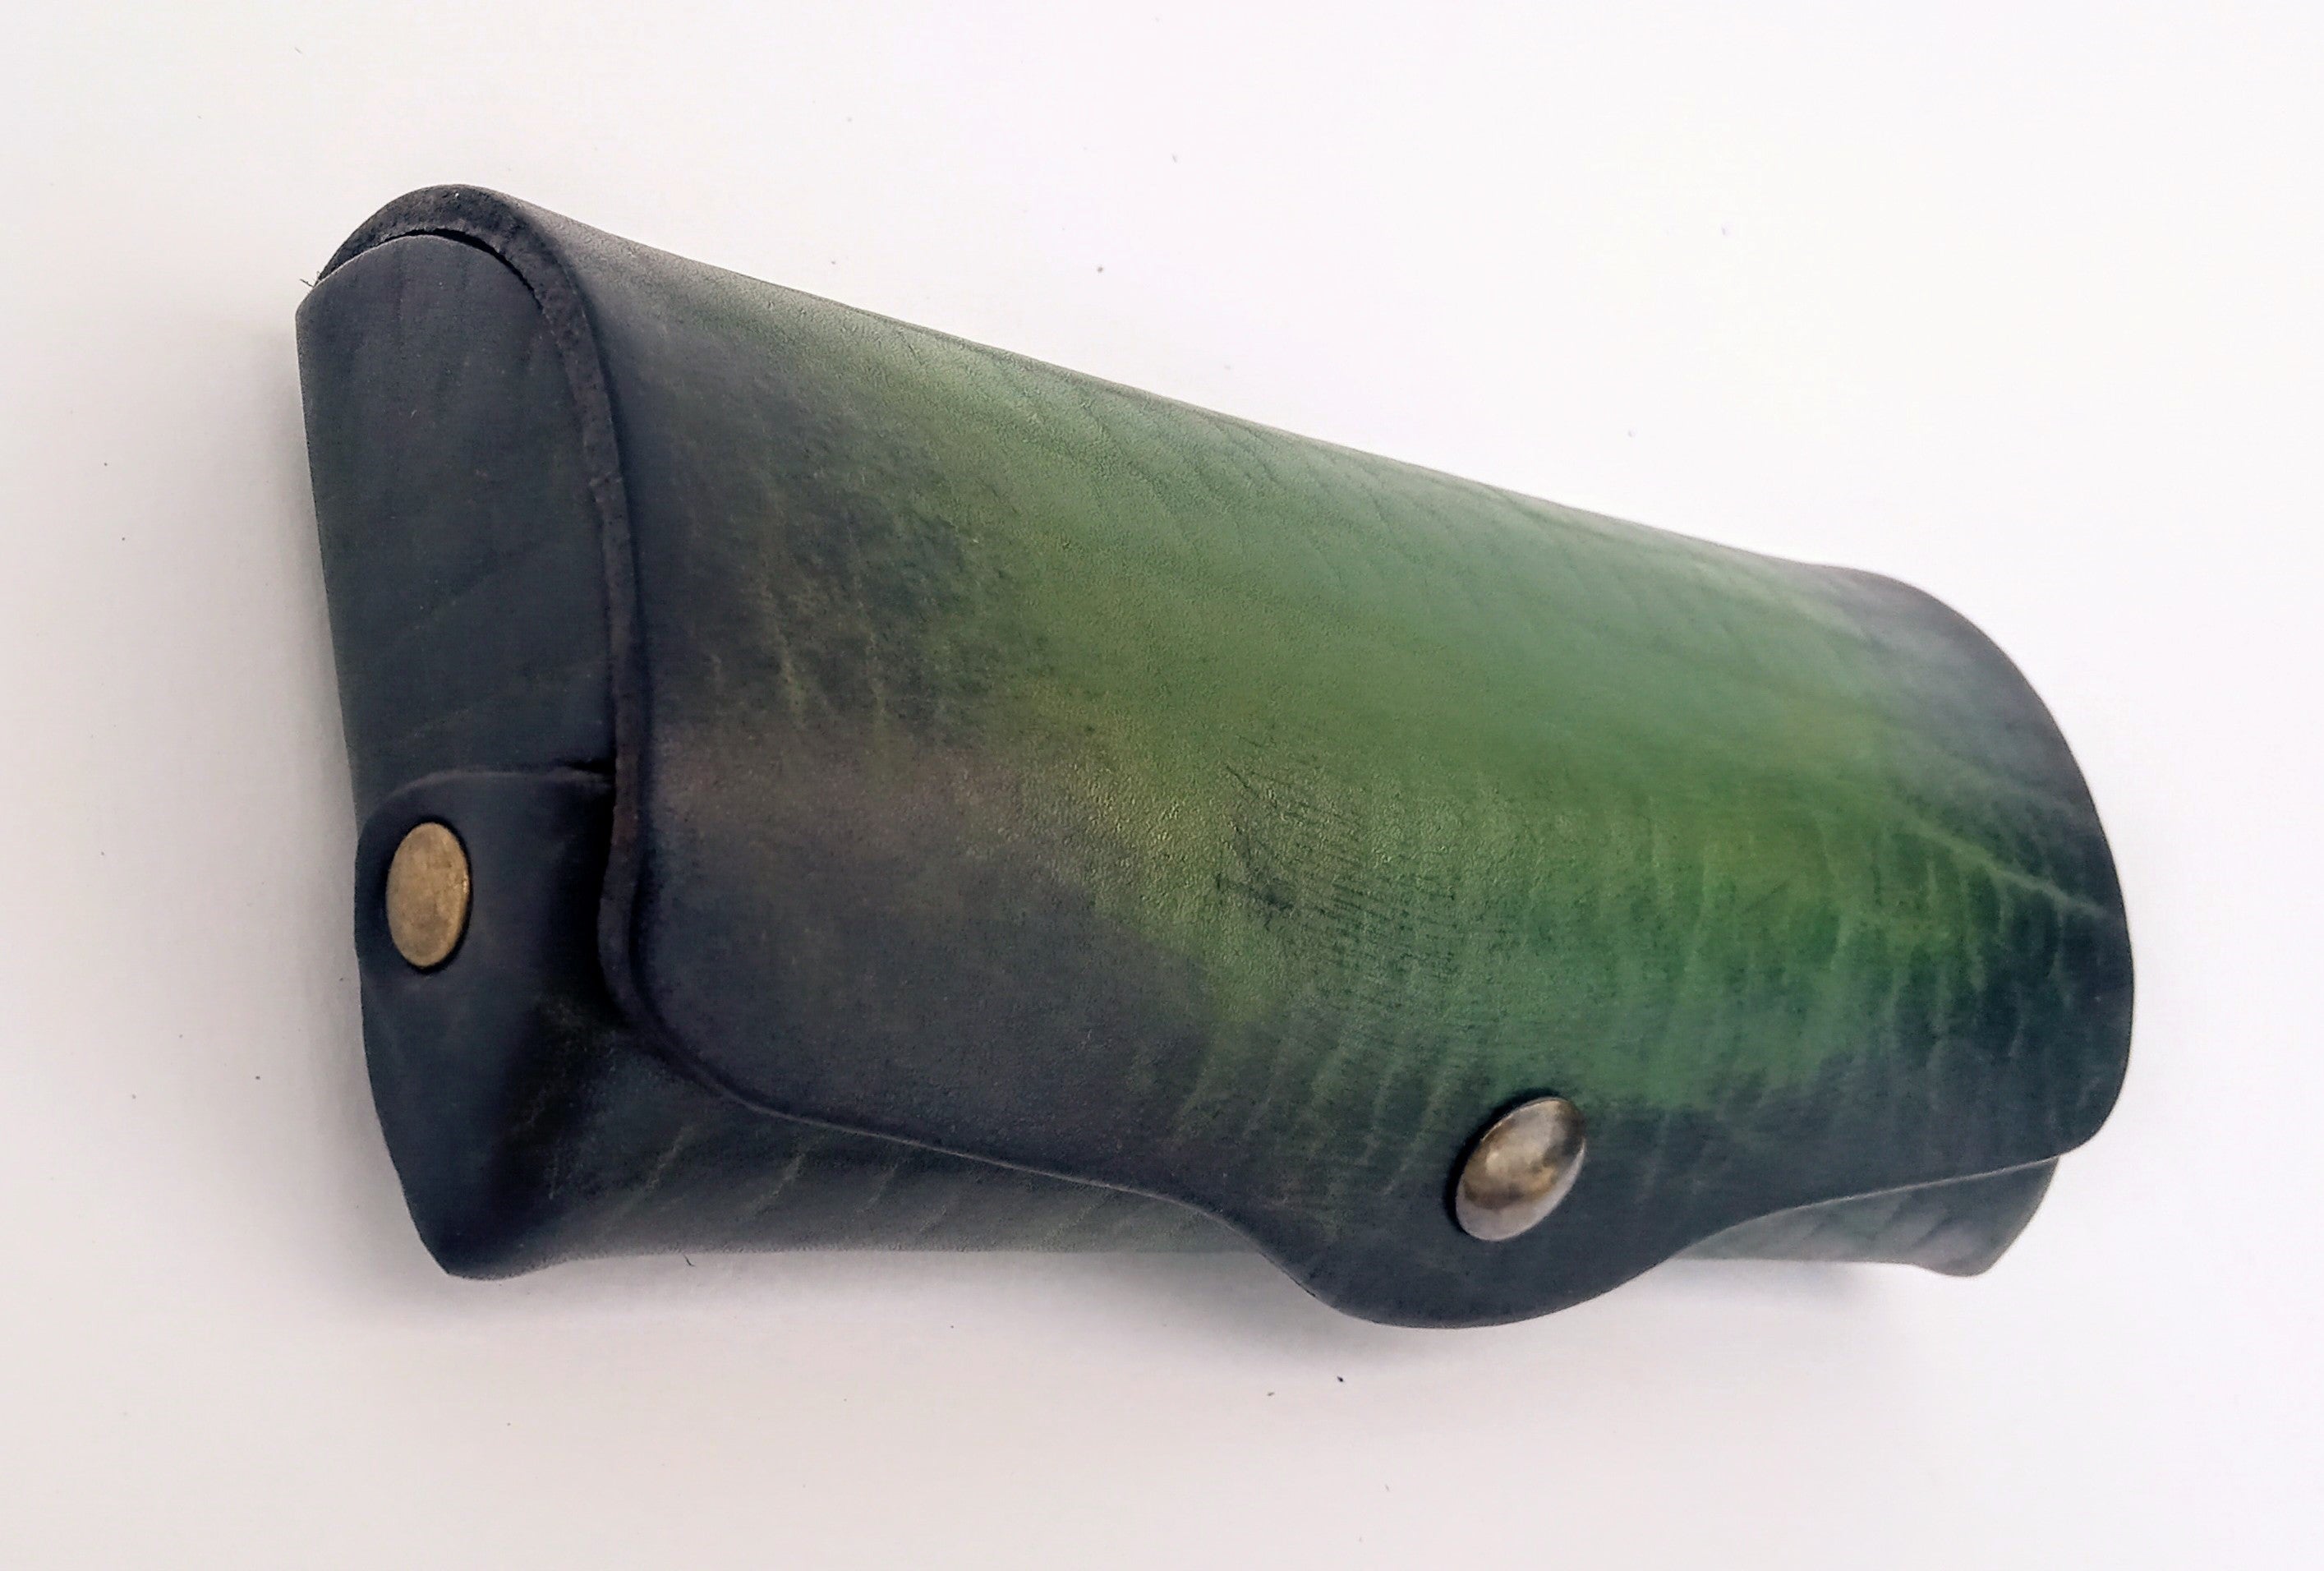 Glasses case with popper